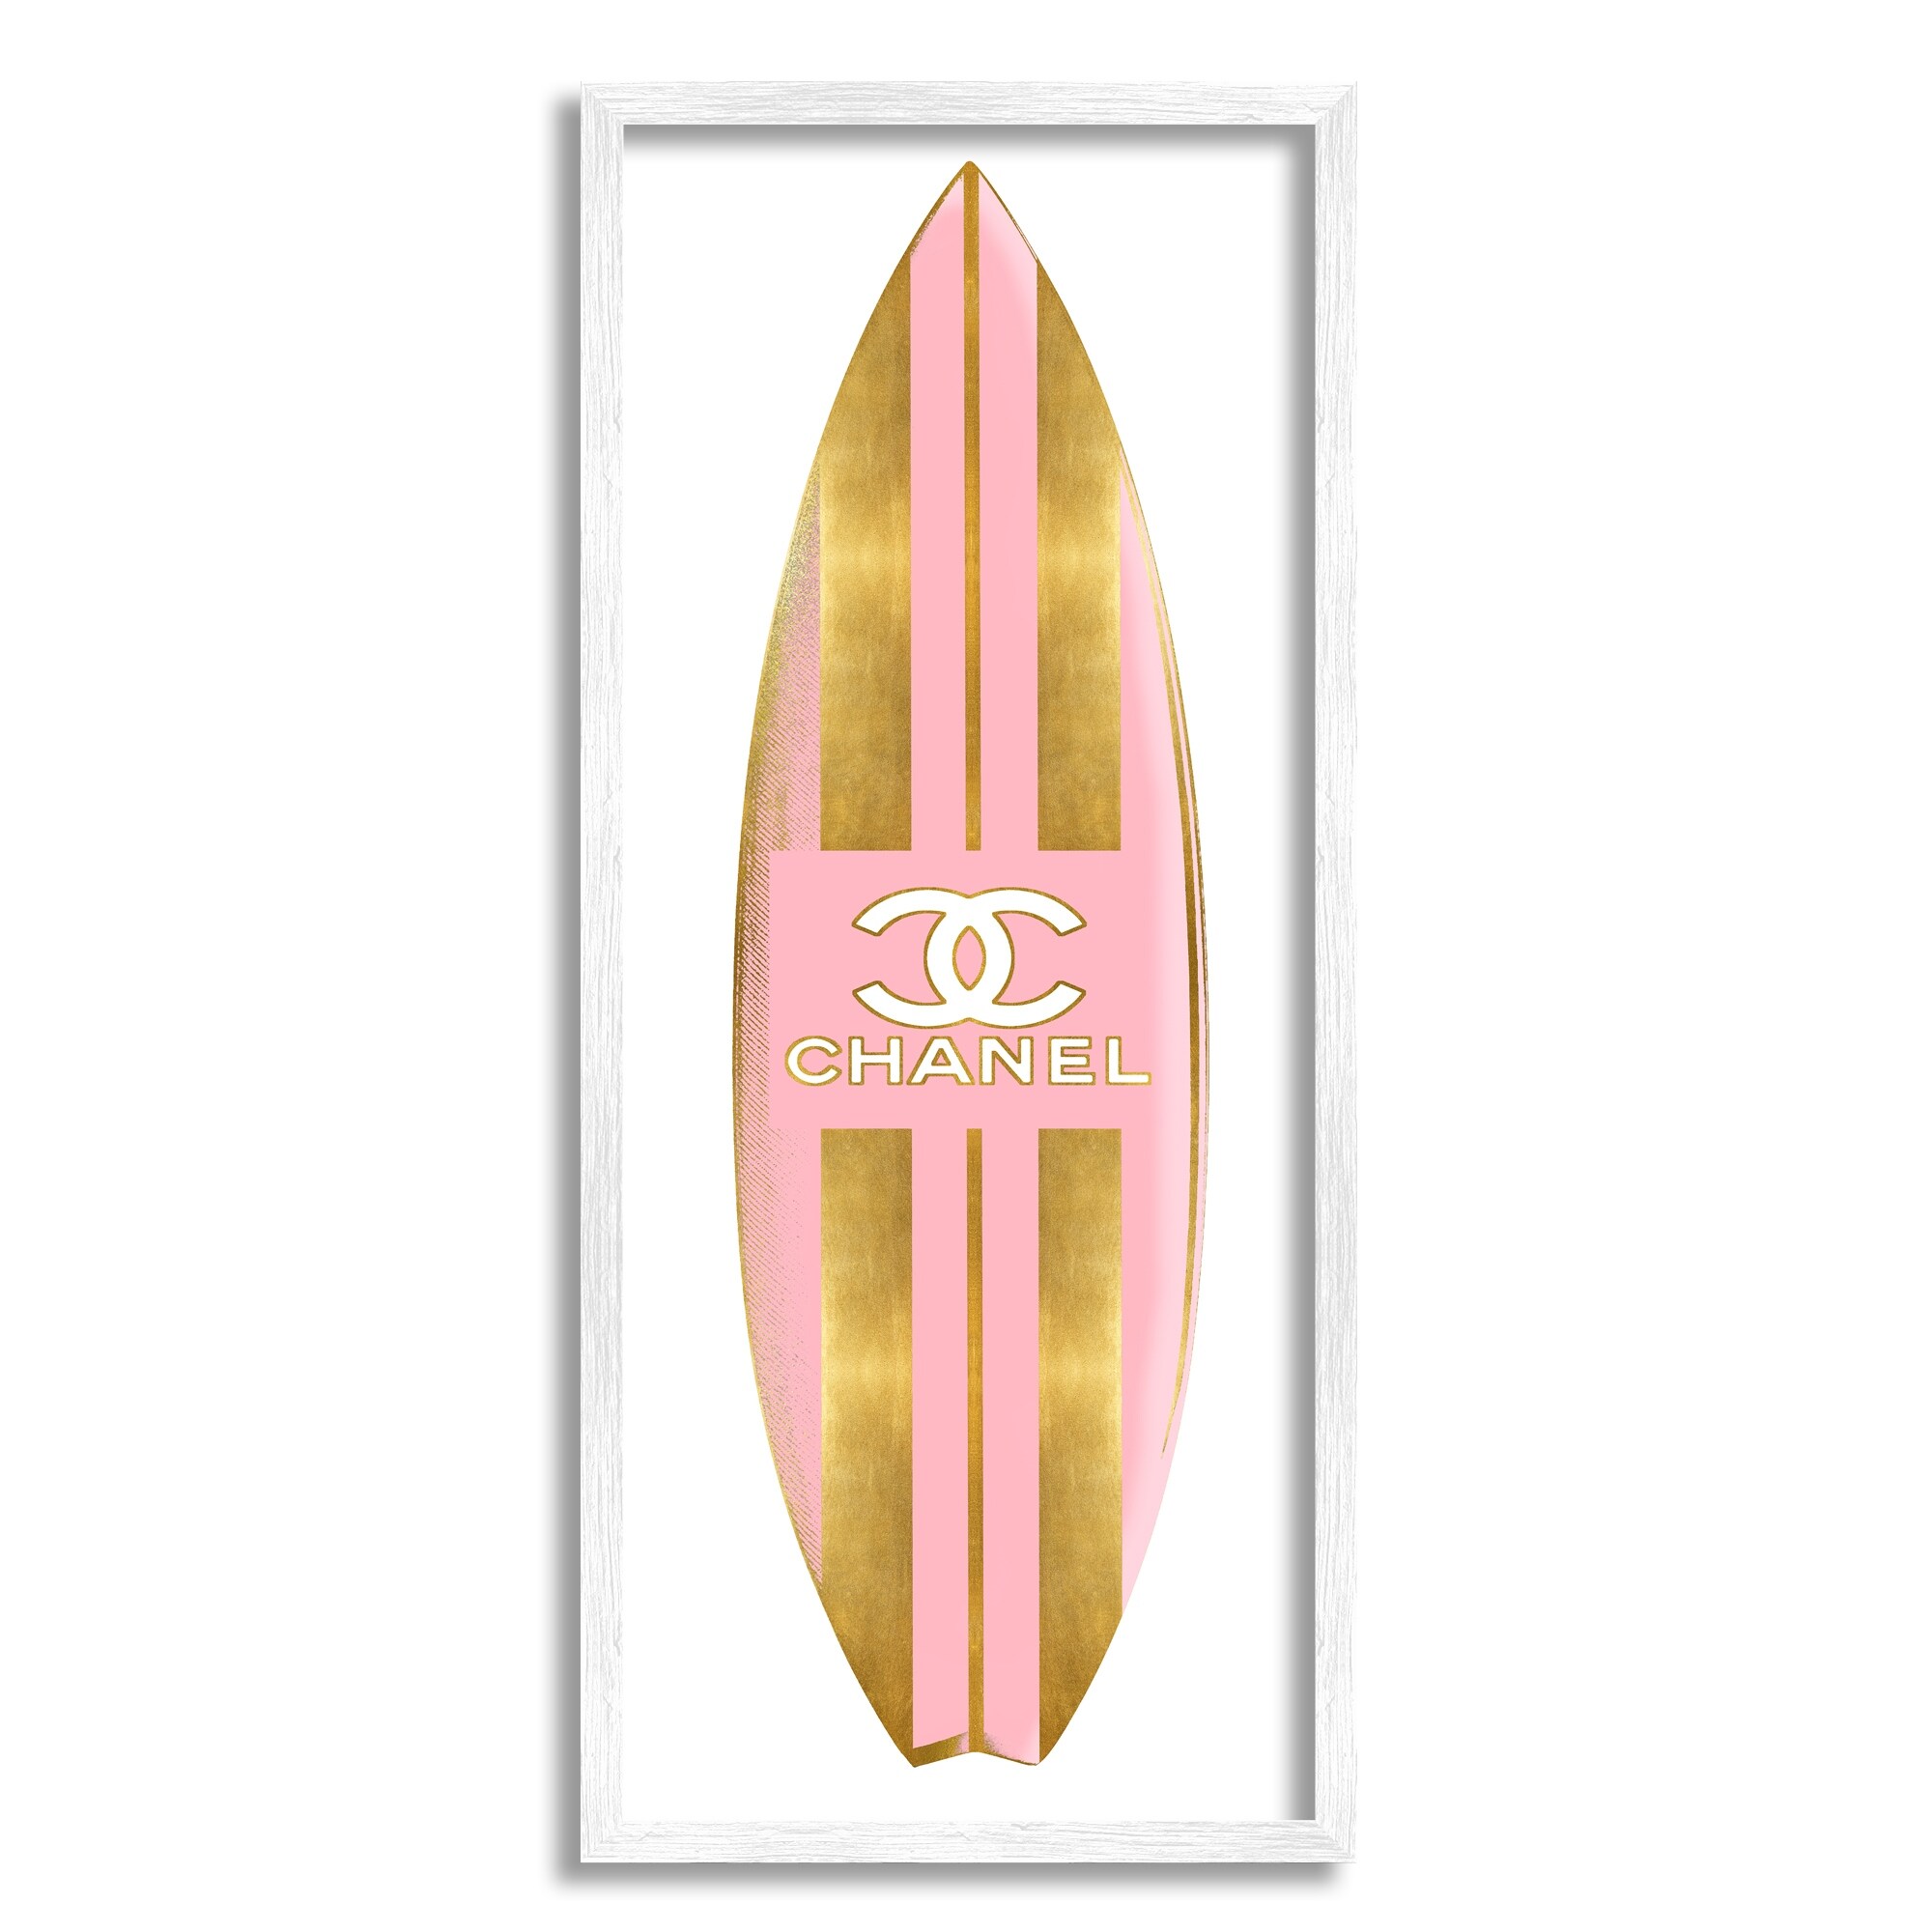 Stupell Industries Bold Trendy Patterned Fashion Design Emblem Surfboard  Canvas Wall Art, 13 x 30, Design by Madeline Blake 